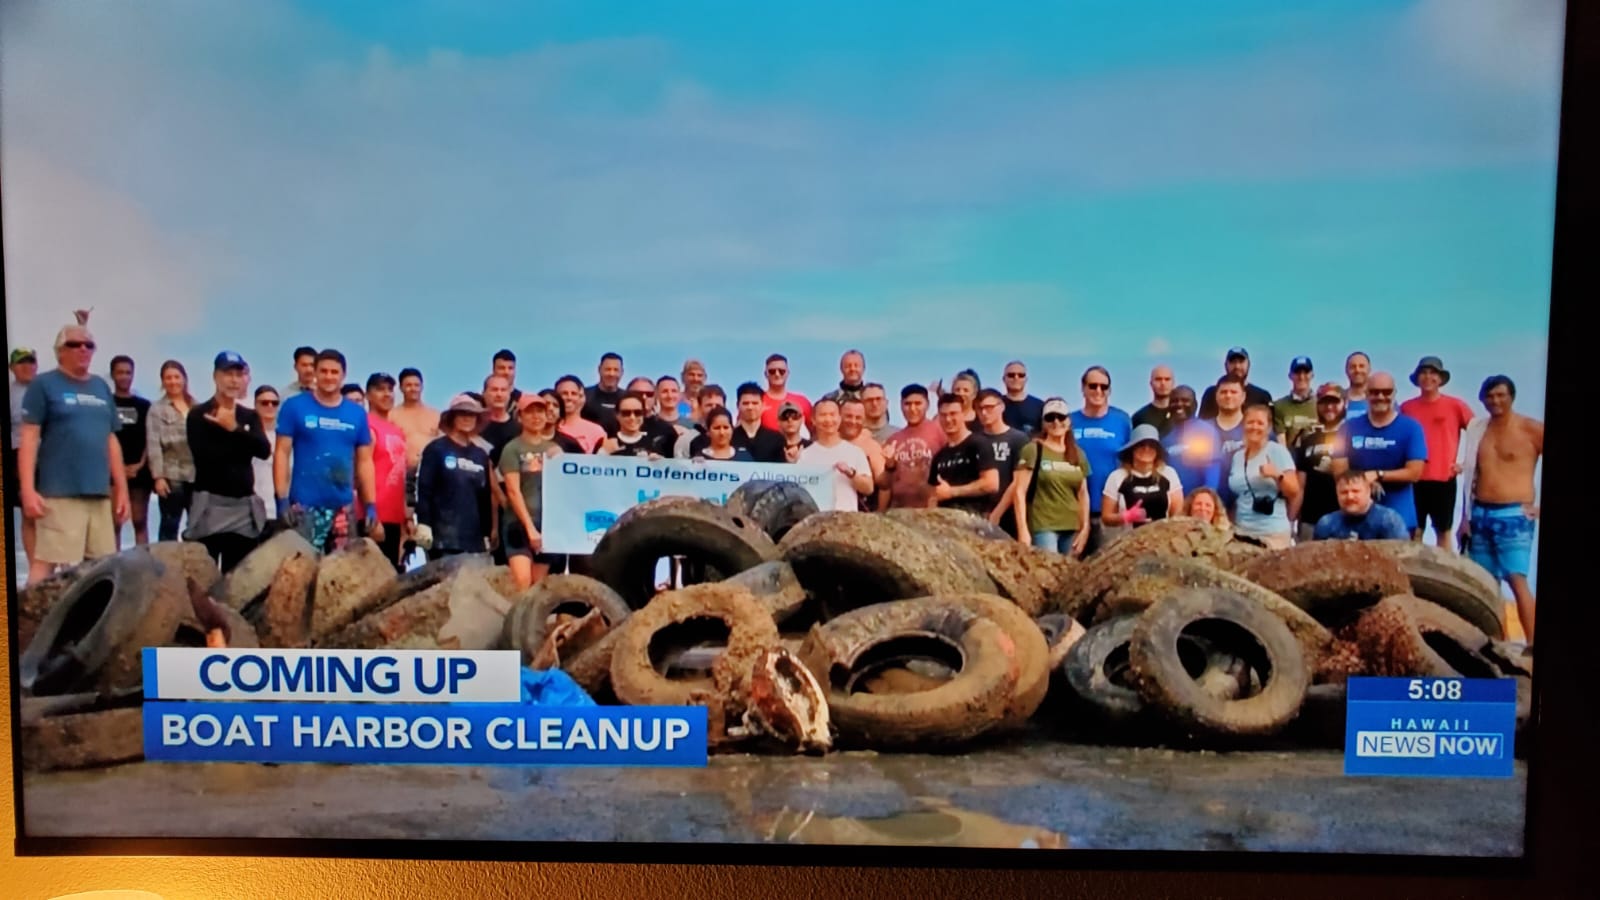 KHON covers the cleanup, crew gathers for photo